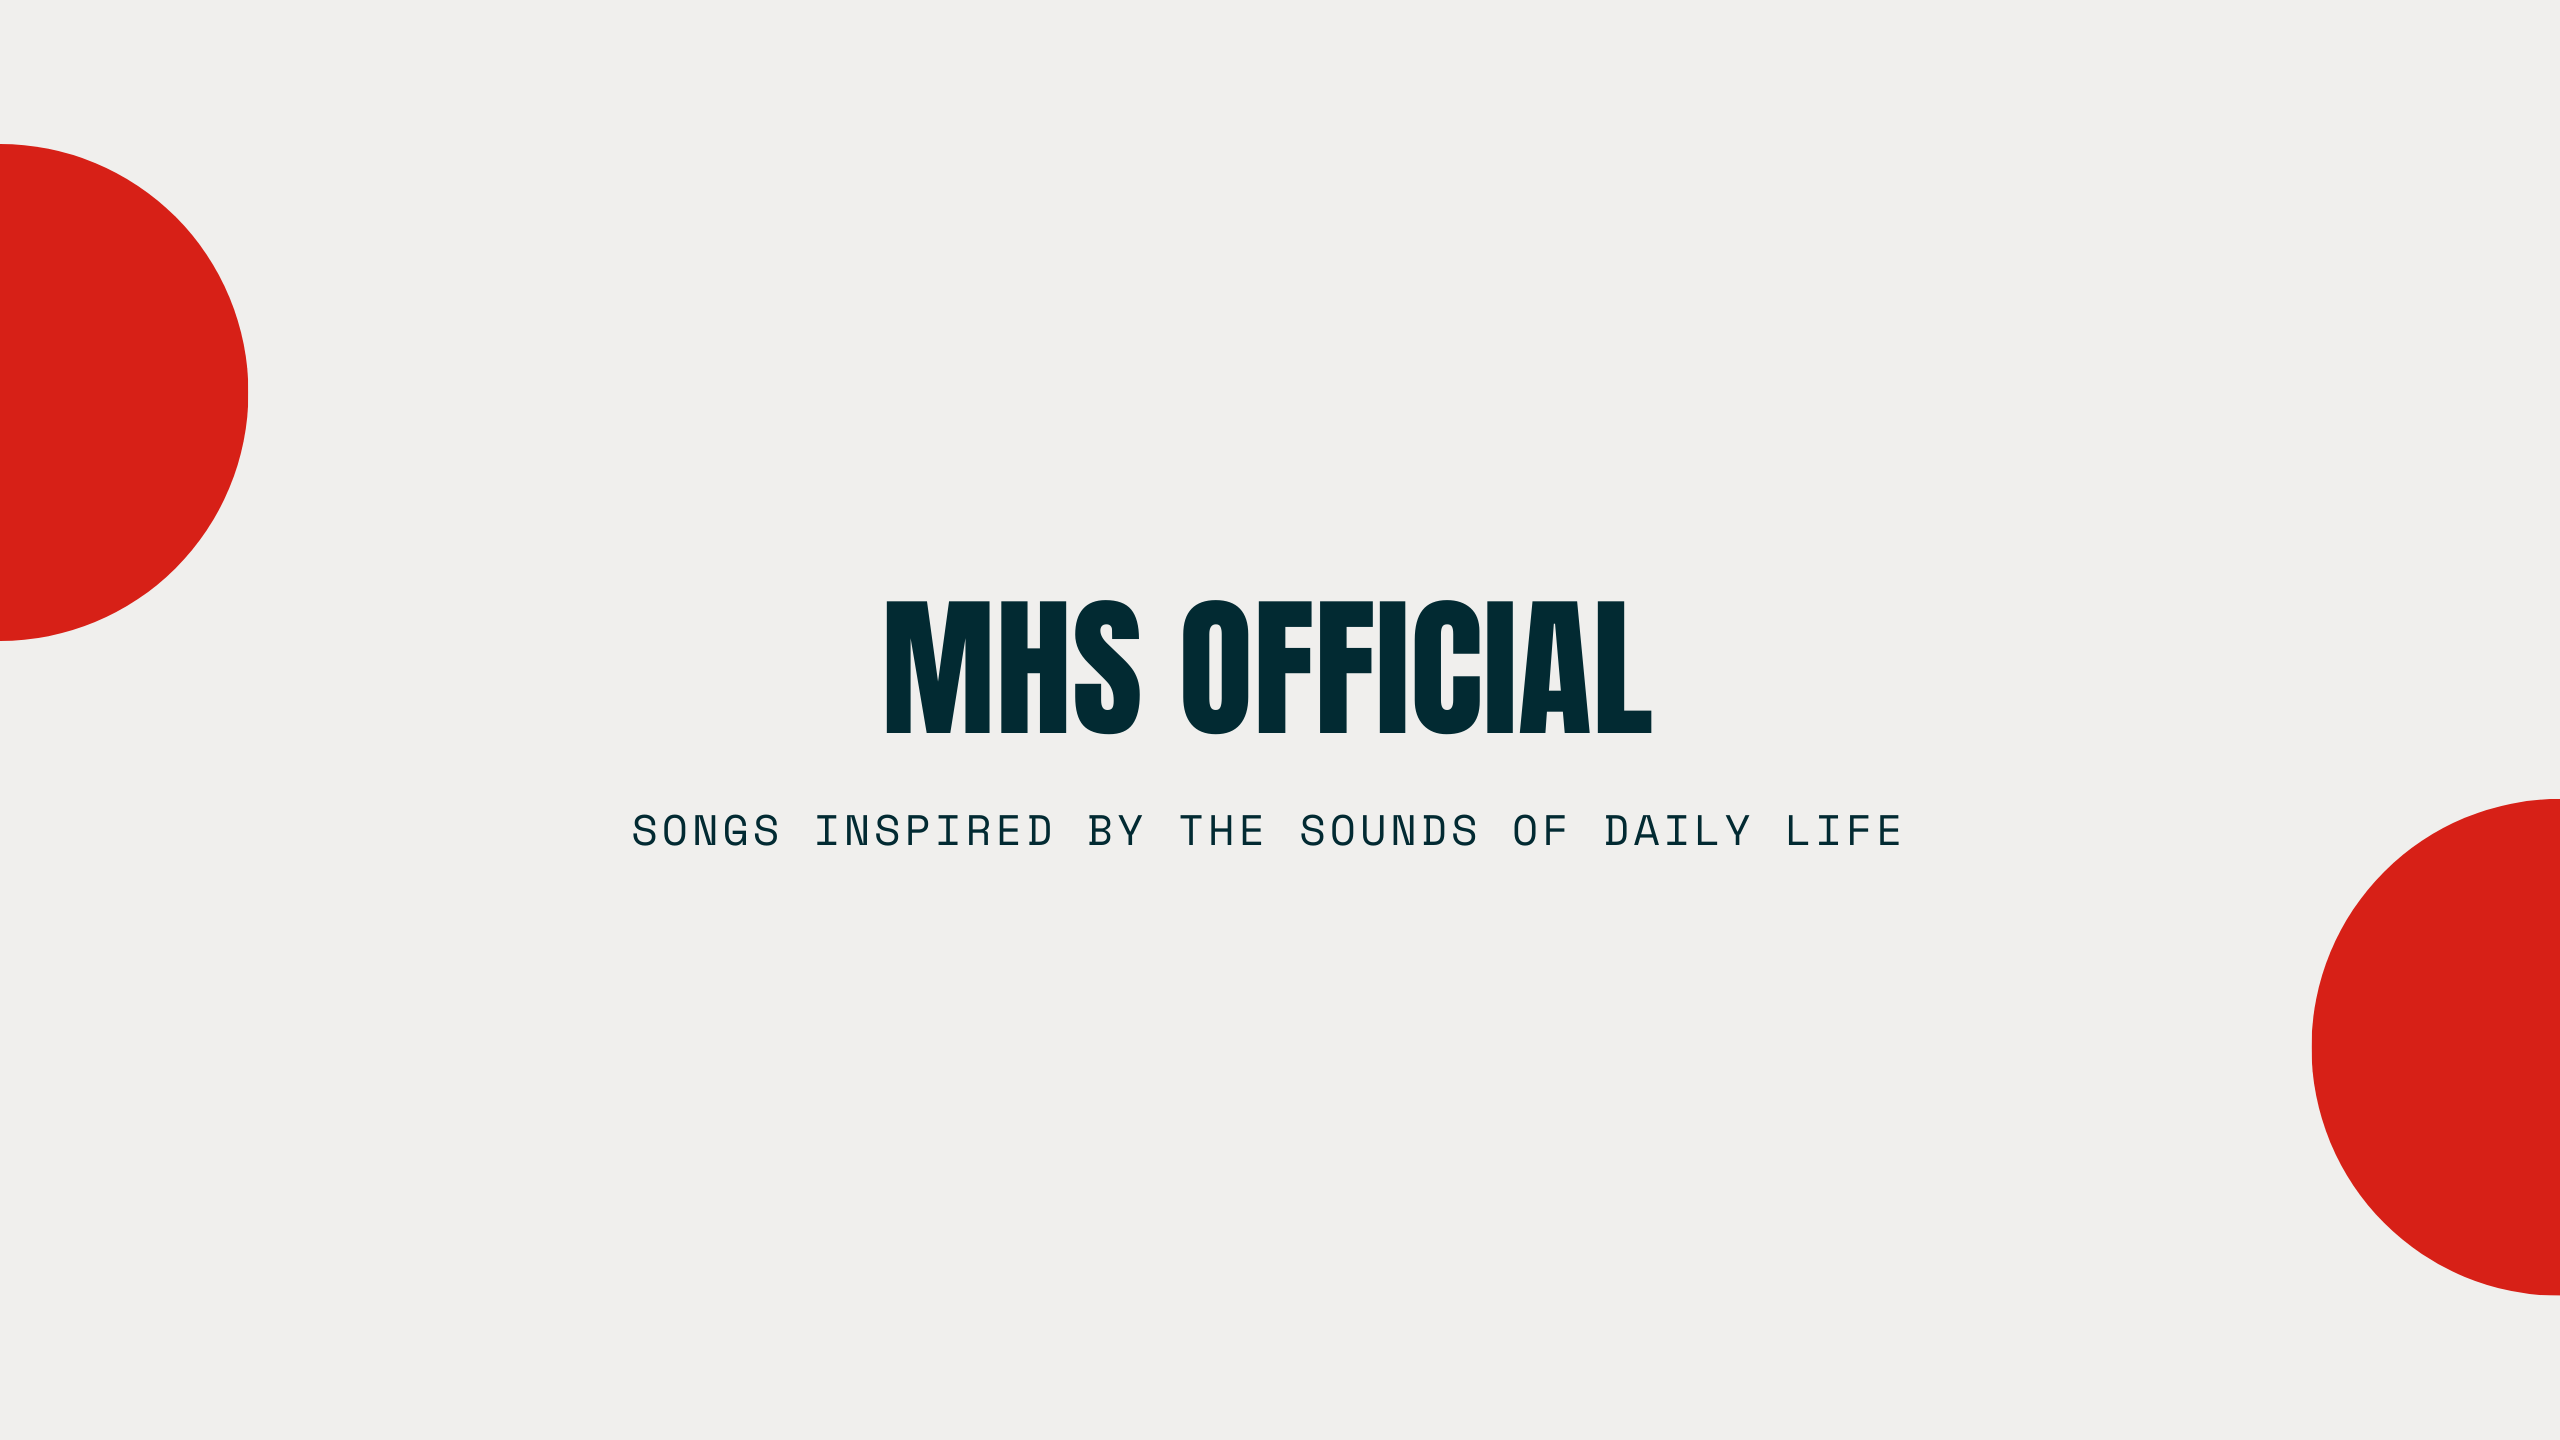 MHS official